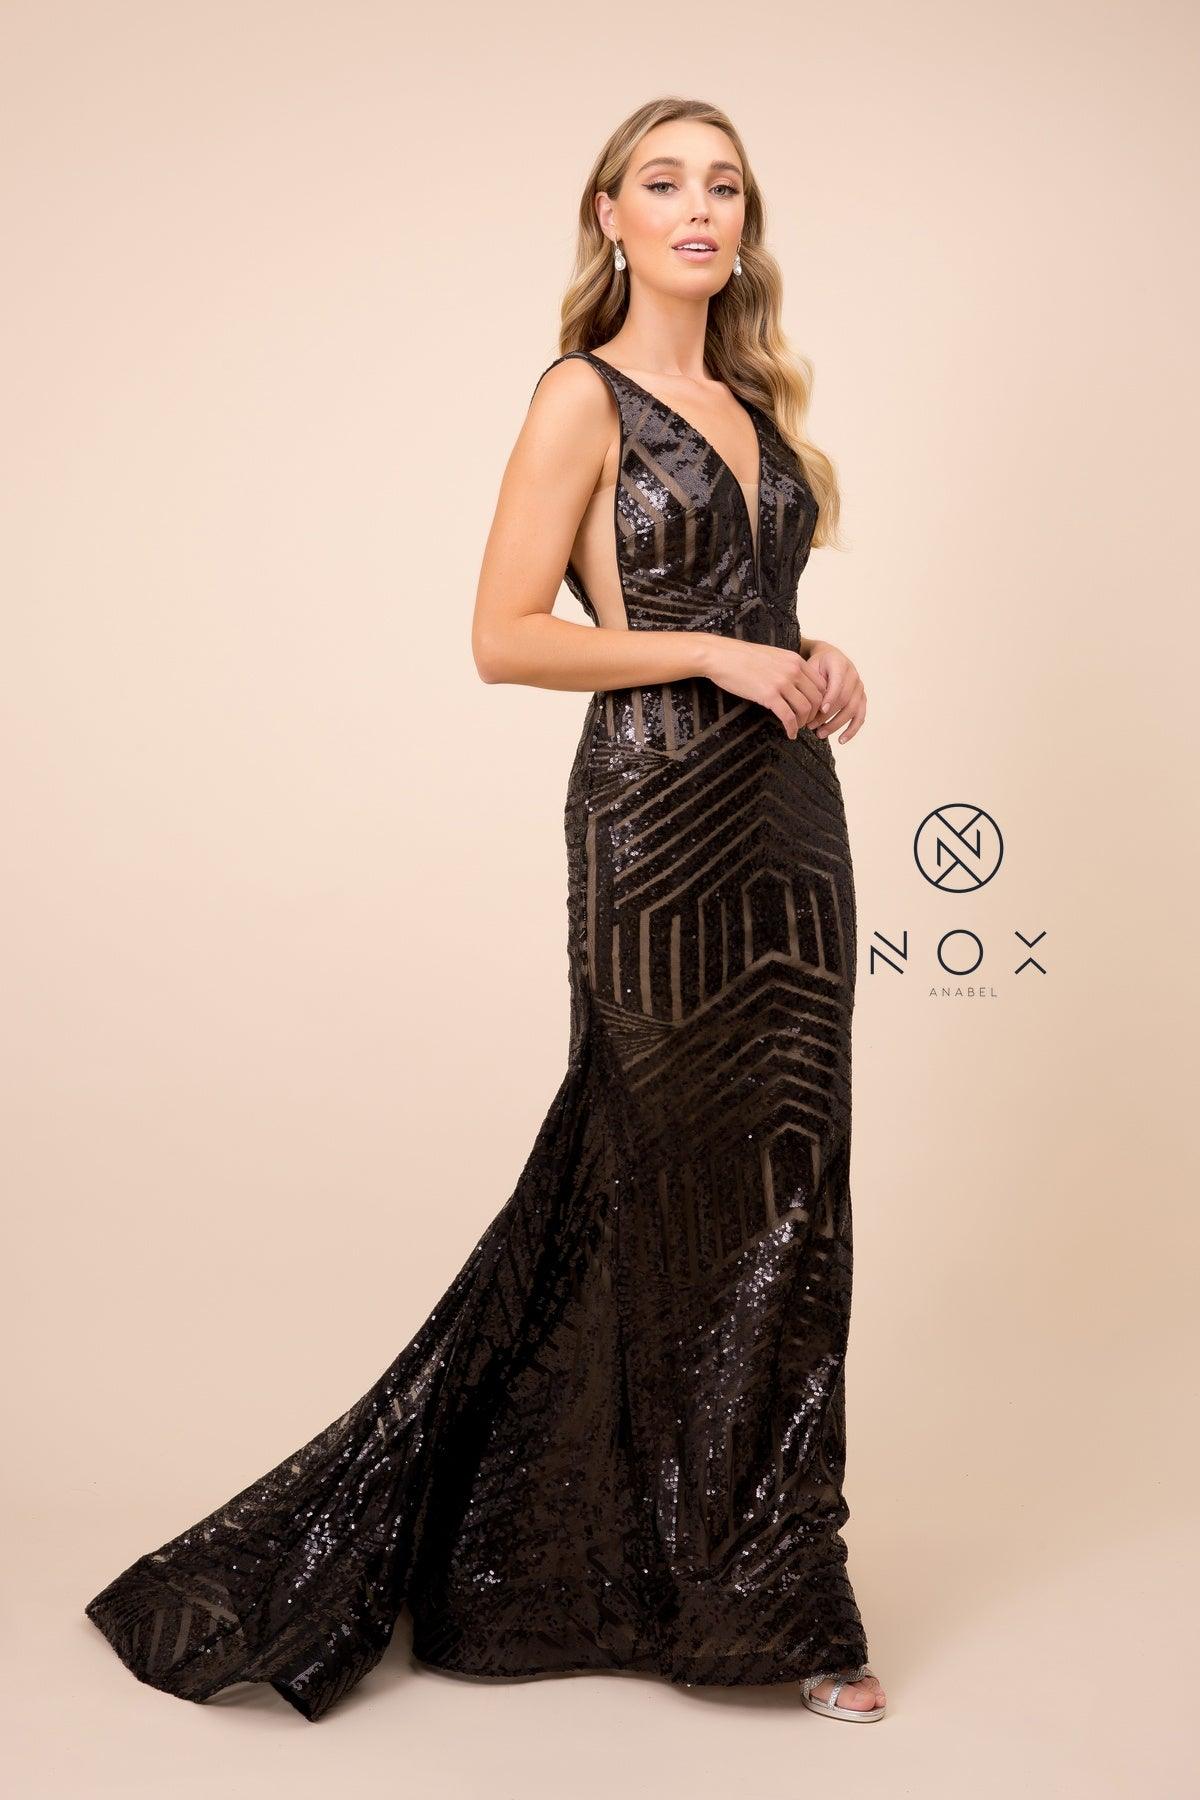 Sexy Side Long Prom Dress Evening Gown - The Dress Outlet Nox Anabel